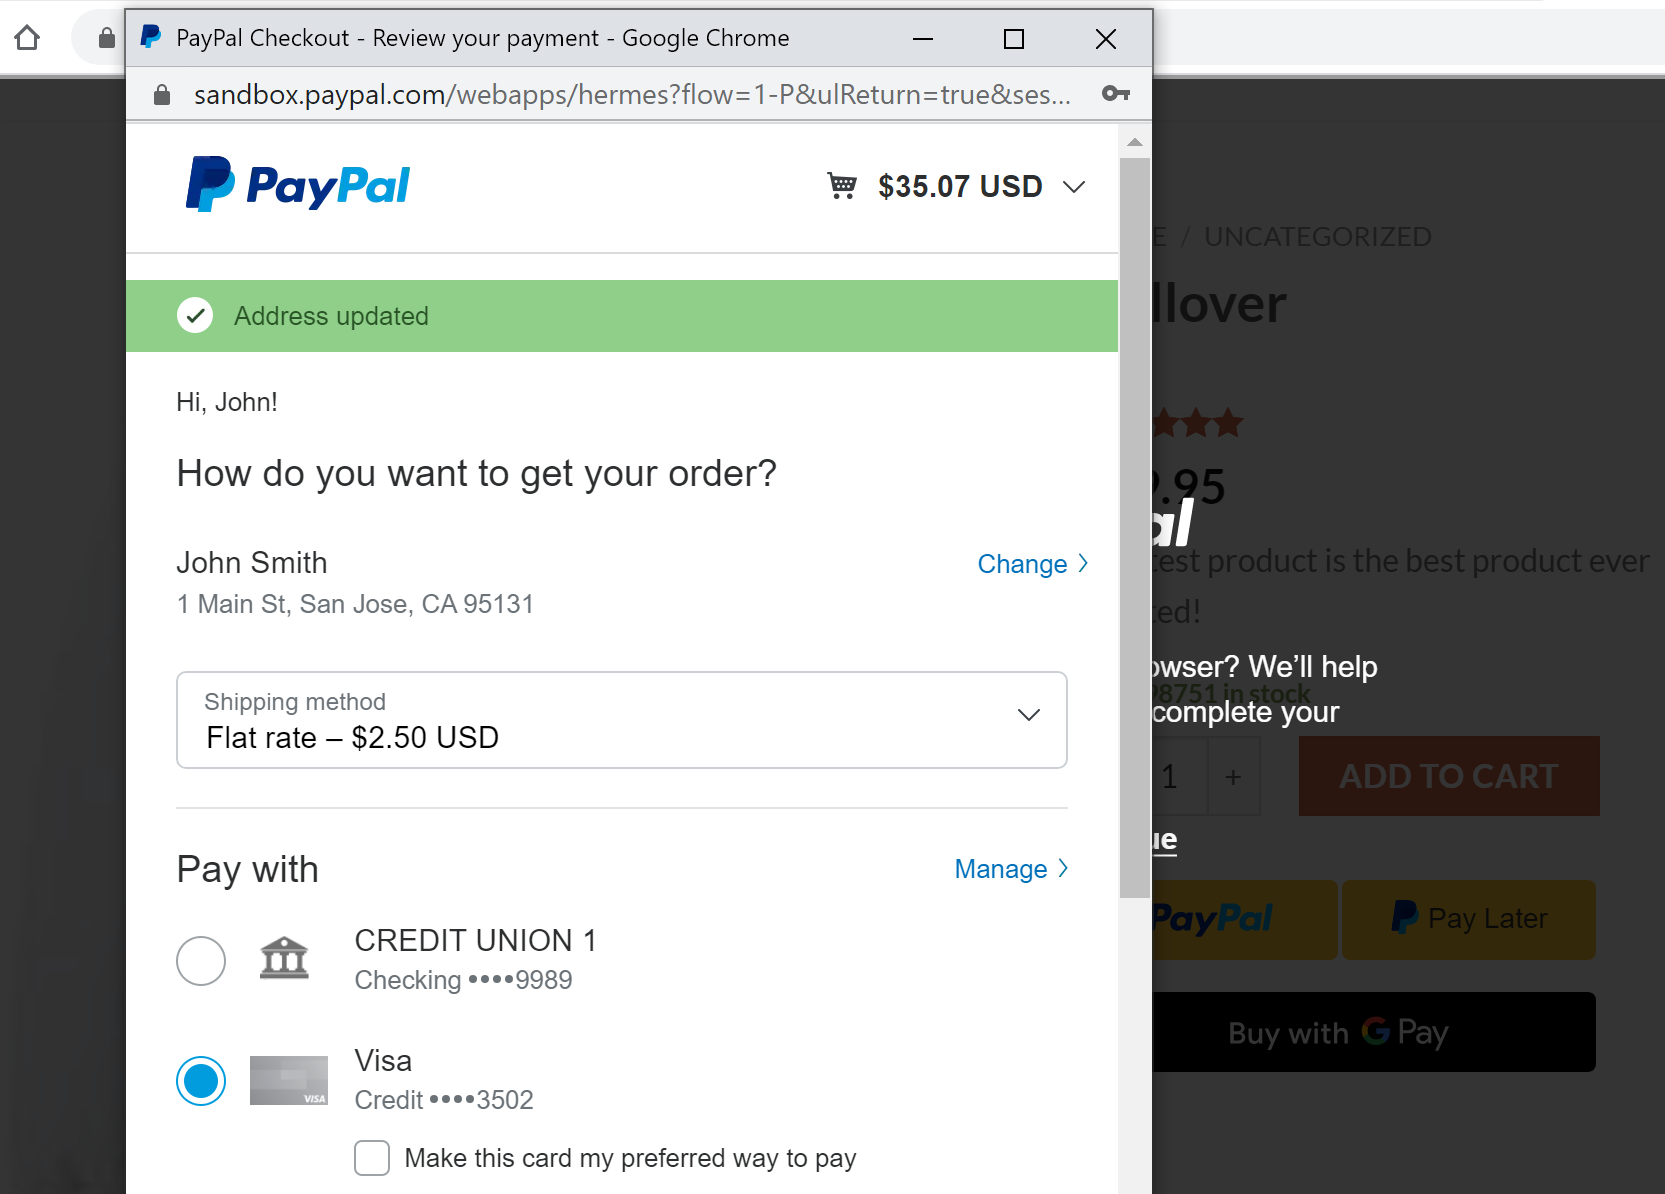 PayPal popup for selecting shipping method